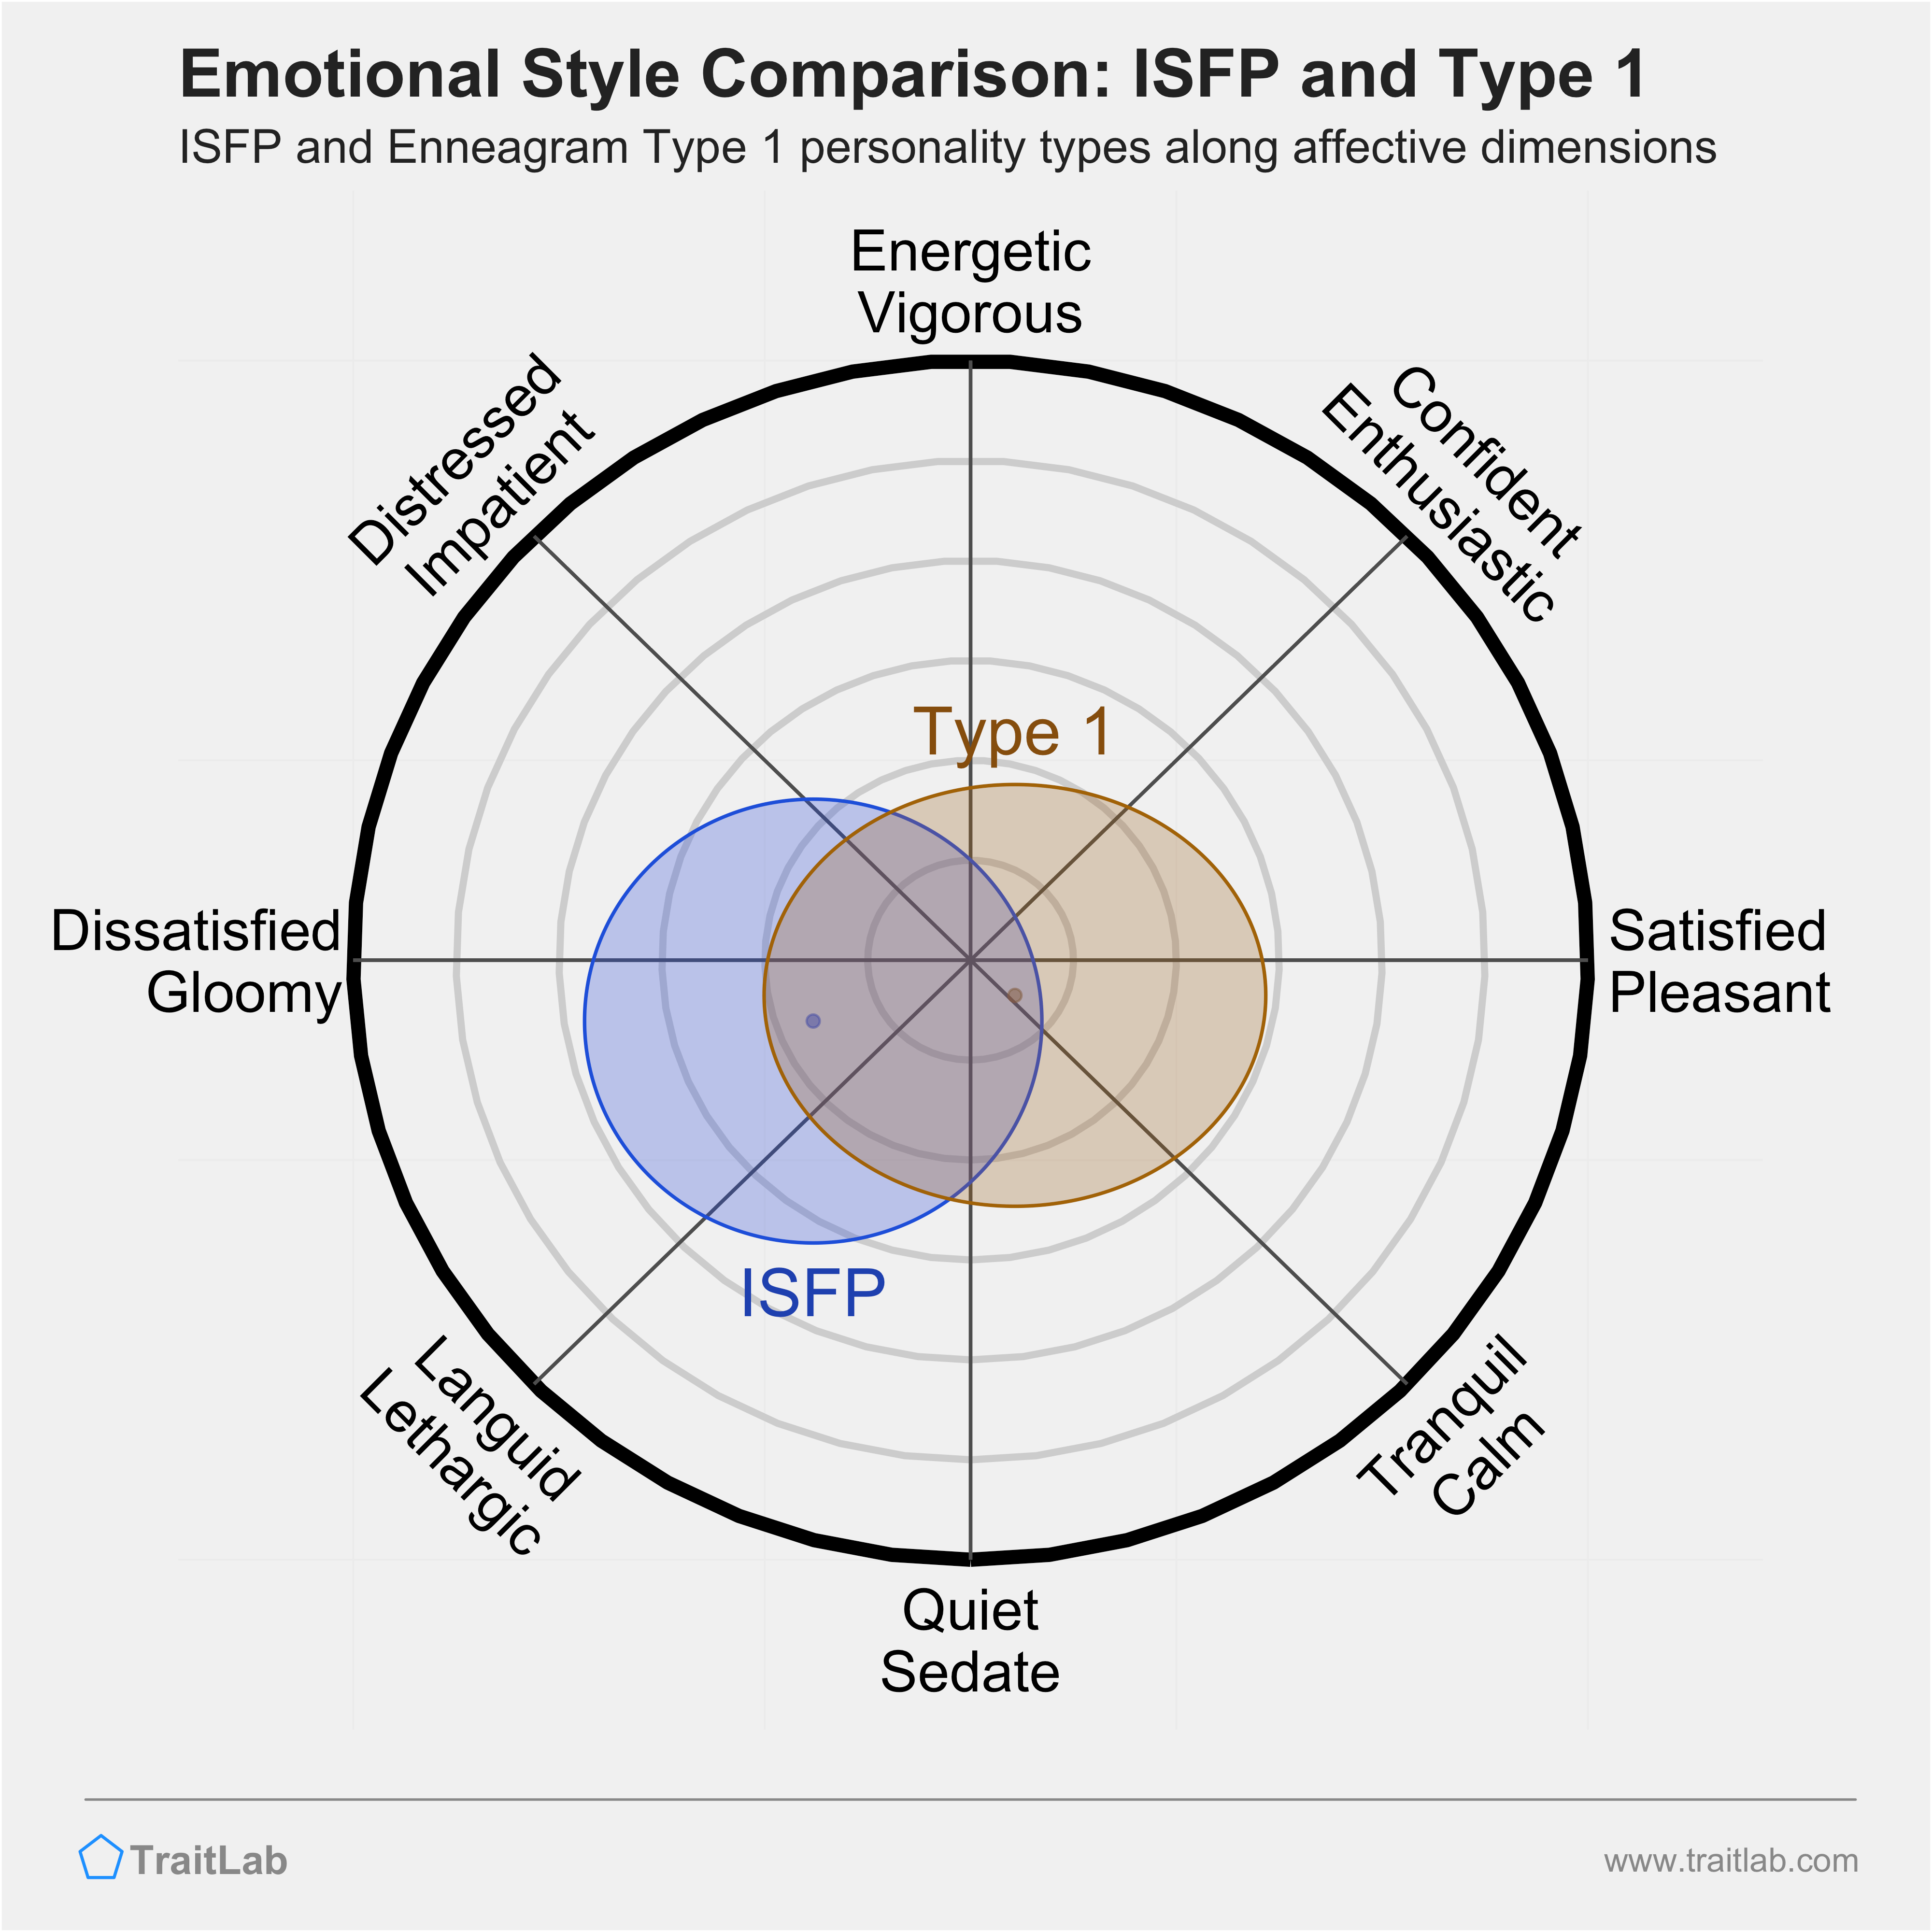 ISFP and Type 1 comparison across emotional (affective) dimensions